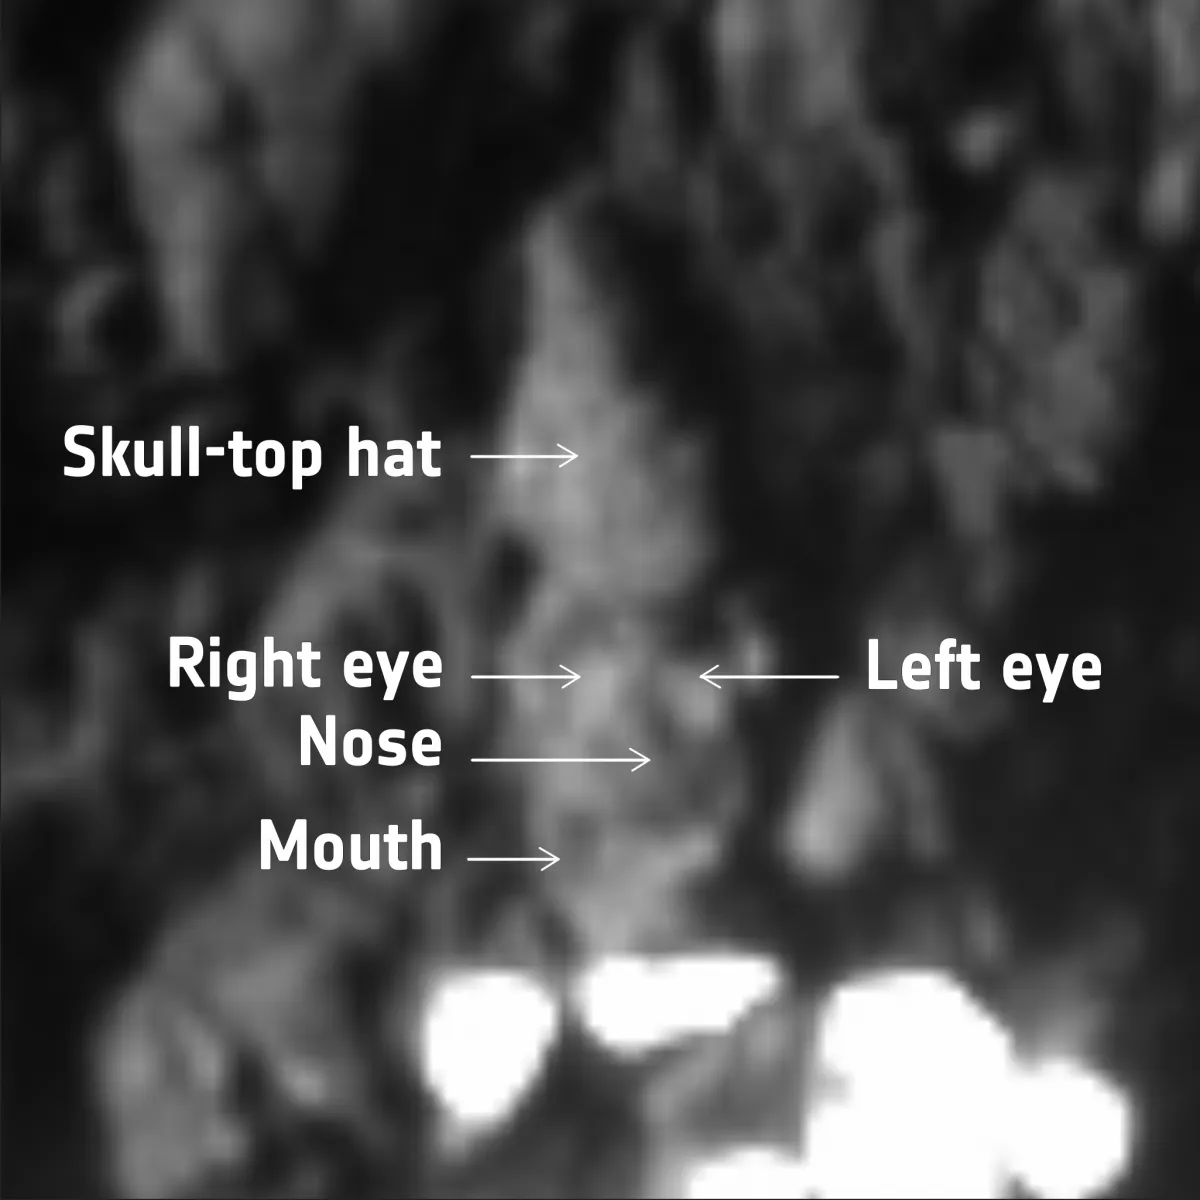 Philae's second landing site appears to take on the form of a skull